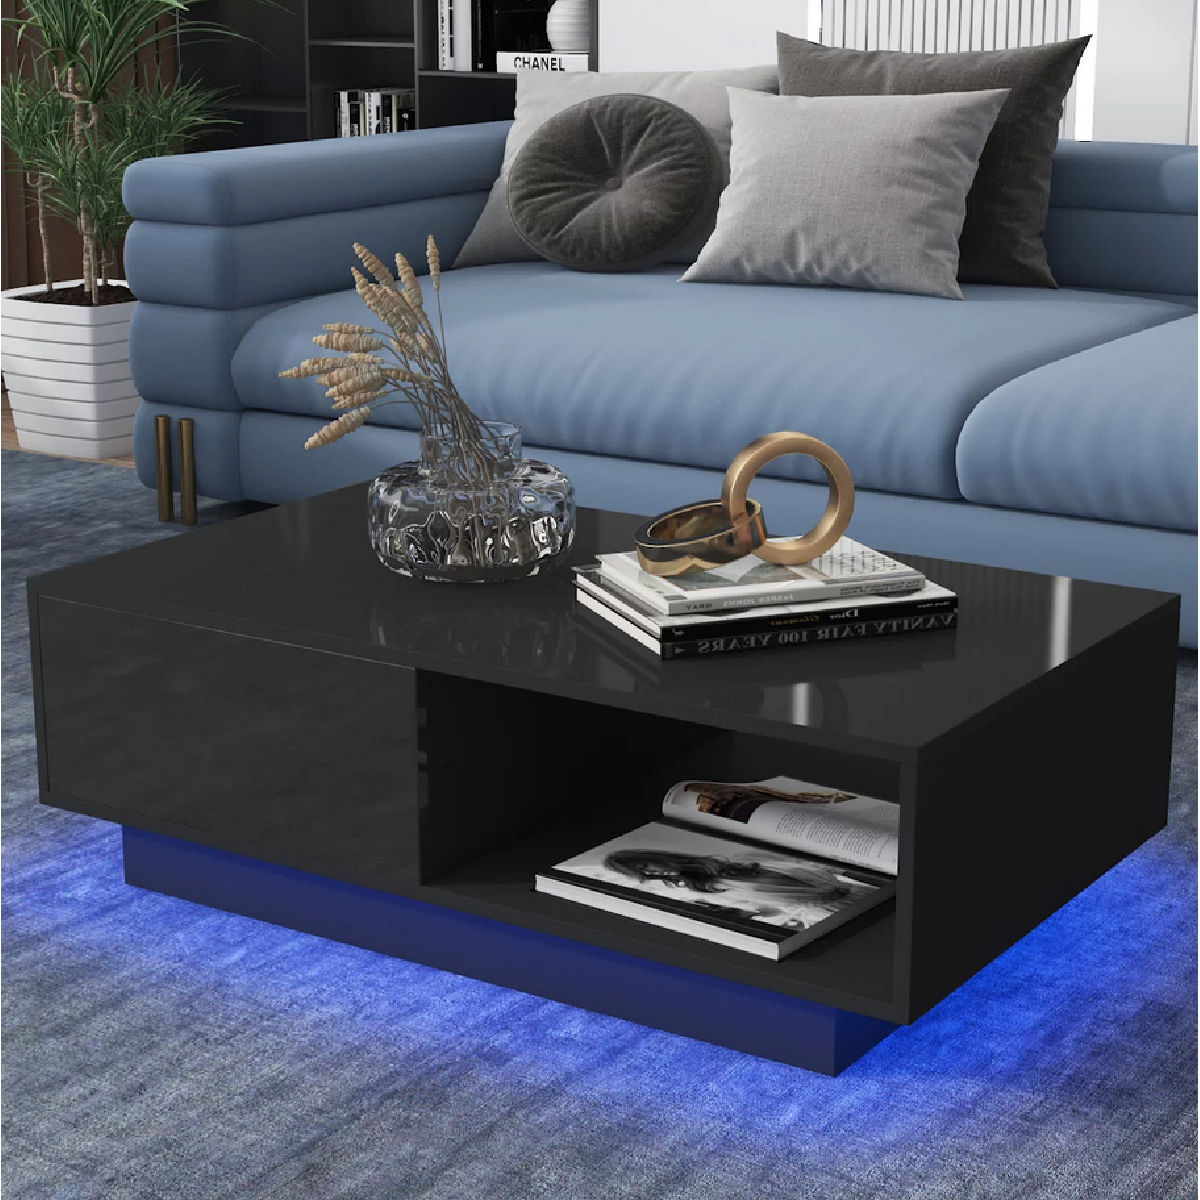 Hommpa LX High Gloss LED Backlit Coffee Table